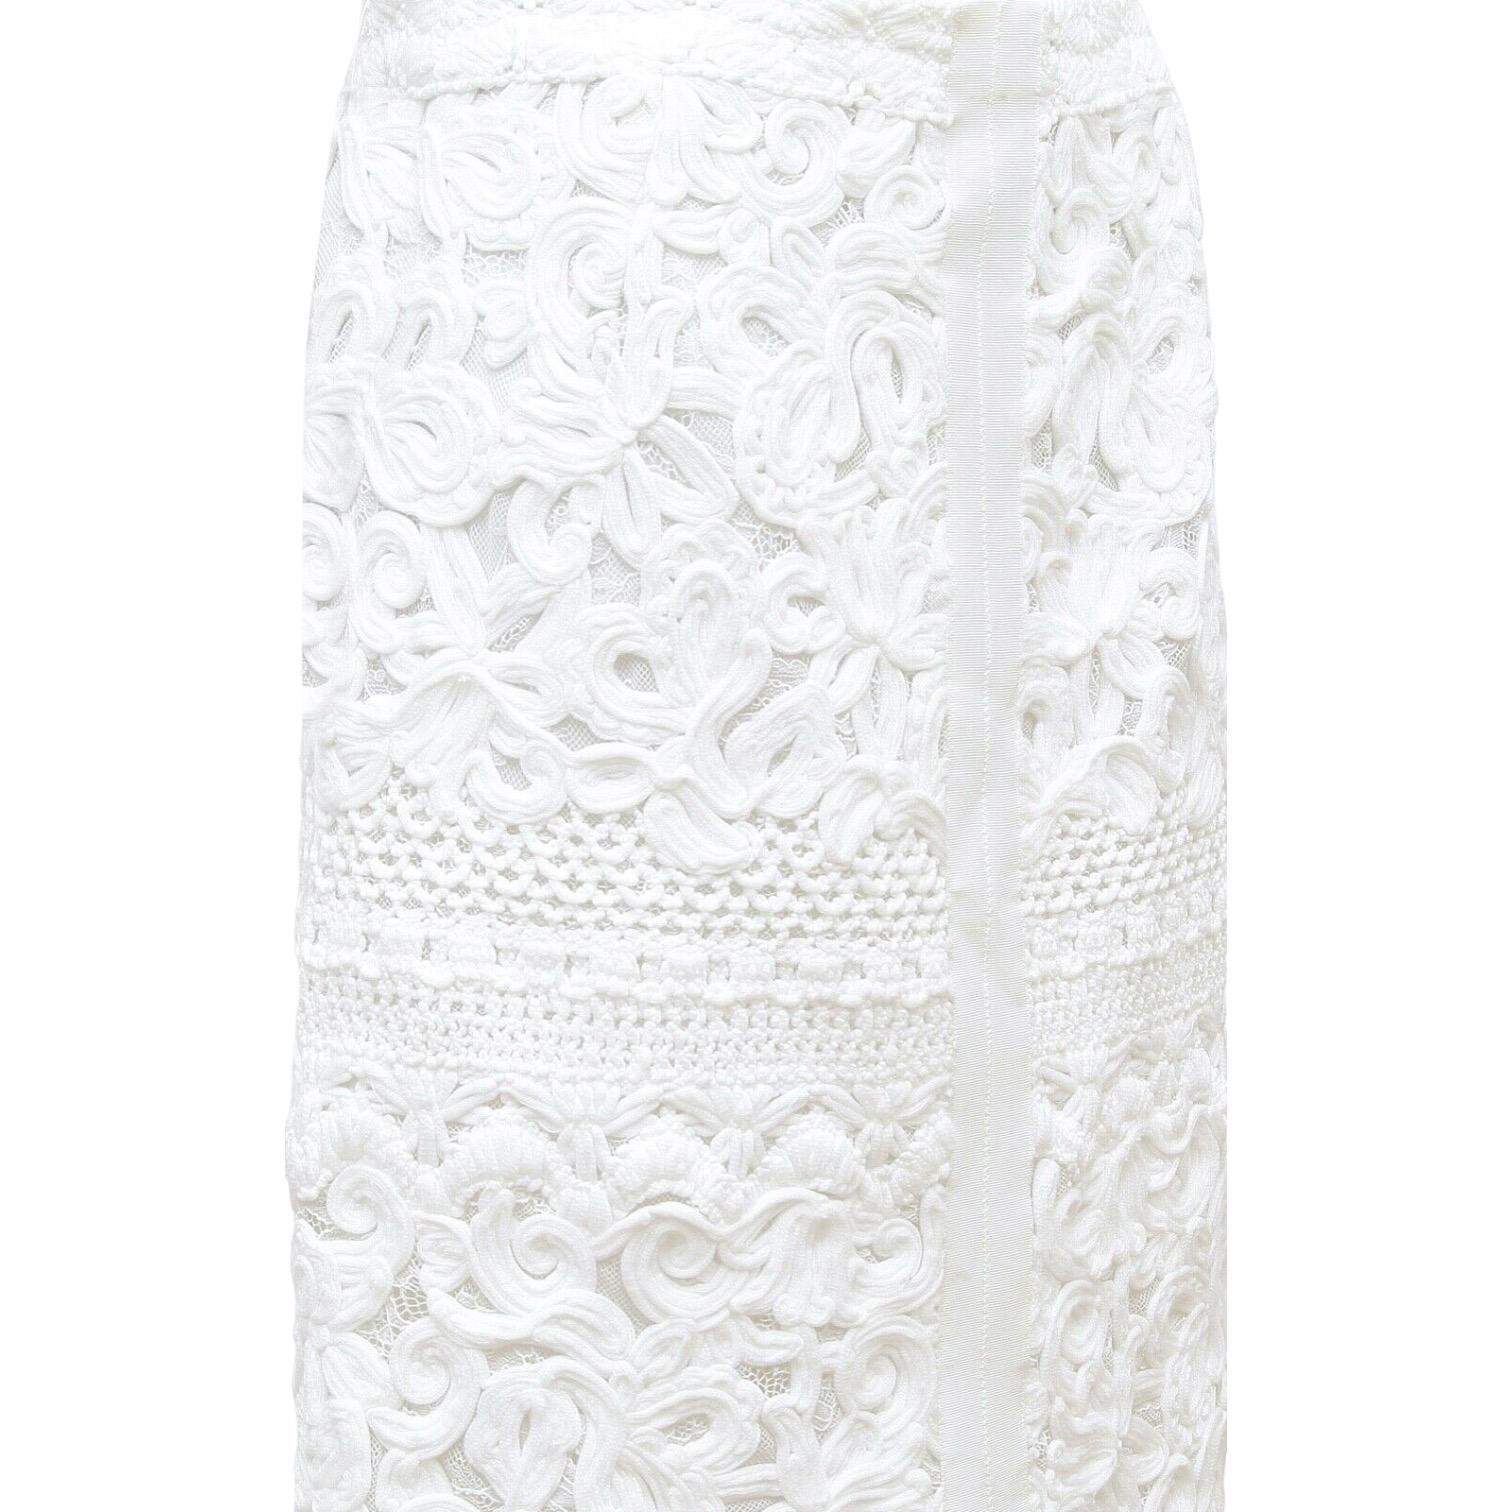 Gray ERMANNO SCERVINO White Skirt Lace Pencil Lined Zipper Sz 40 NWT $1655 For Sale